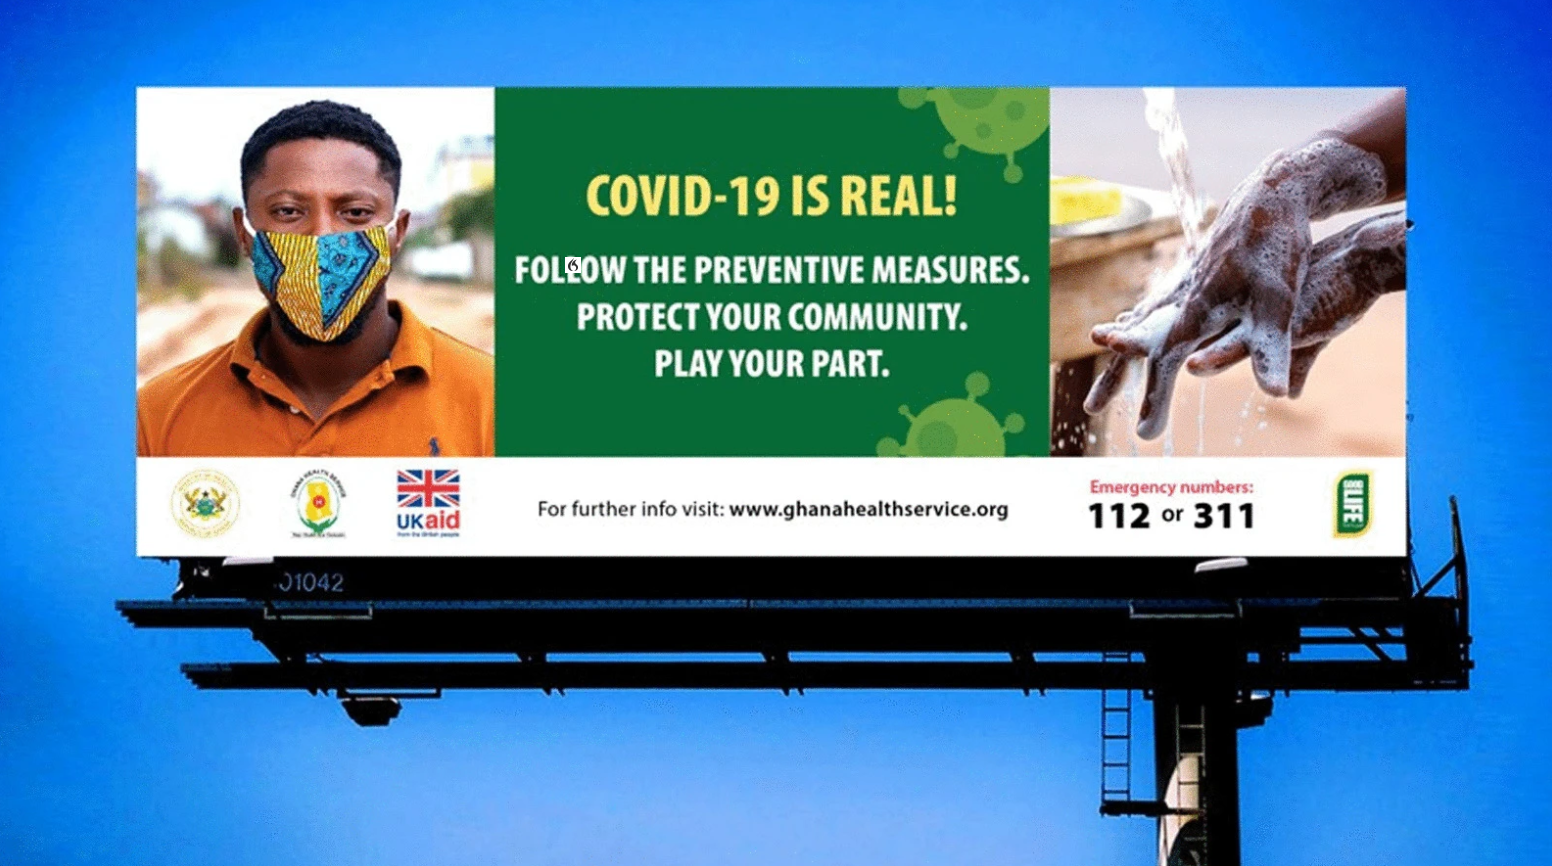 A billboard tells passers-by about how to protect themselves from coronavirus. The billboard includes a picture of a man wearing a mask, and another picture of someone washing their hands.